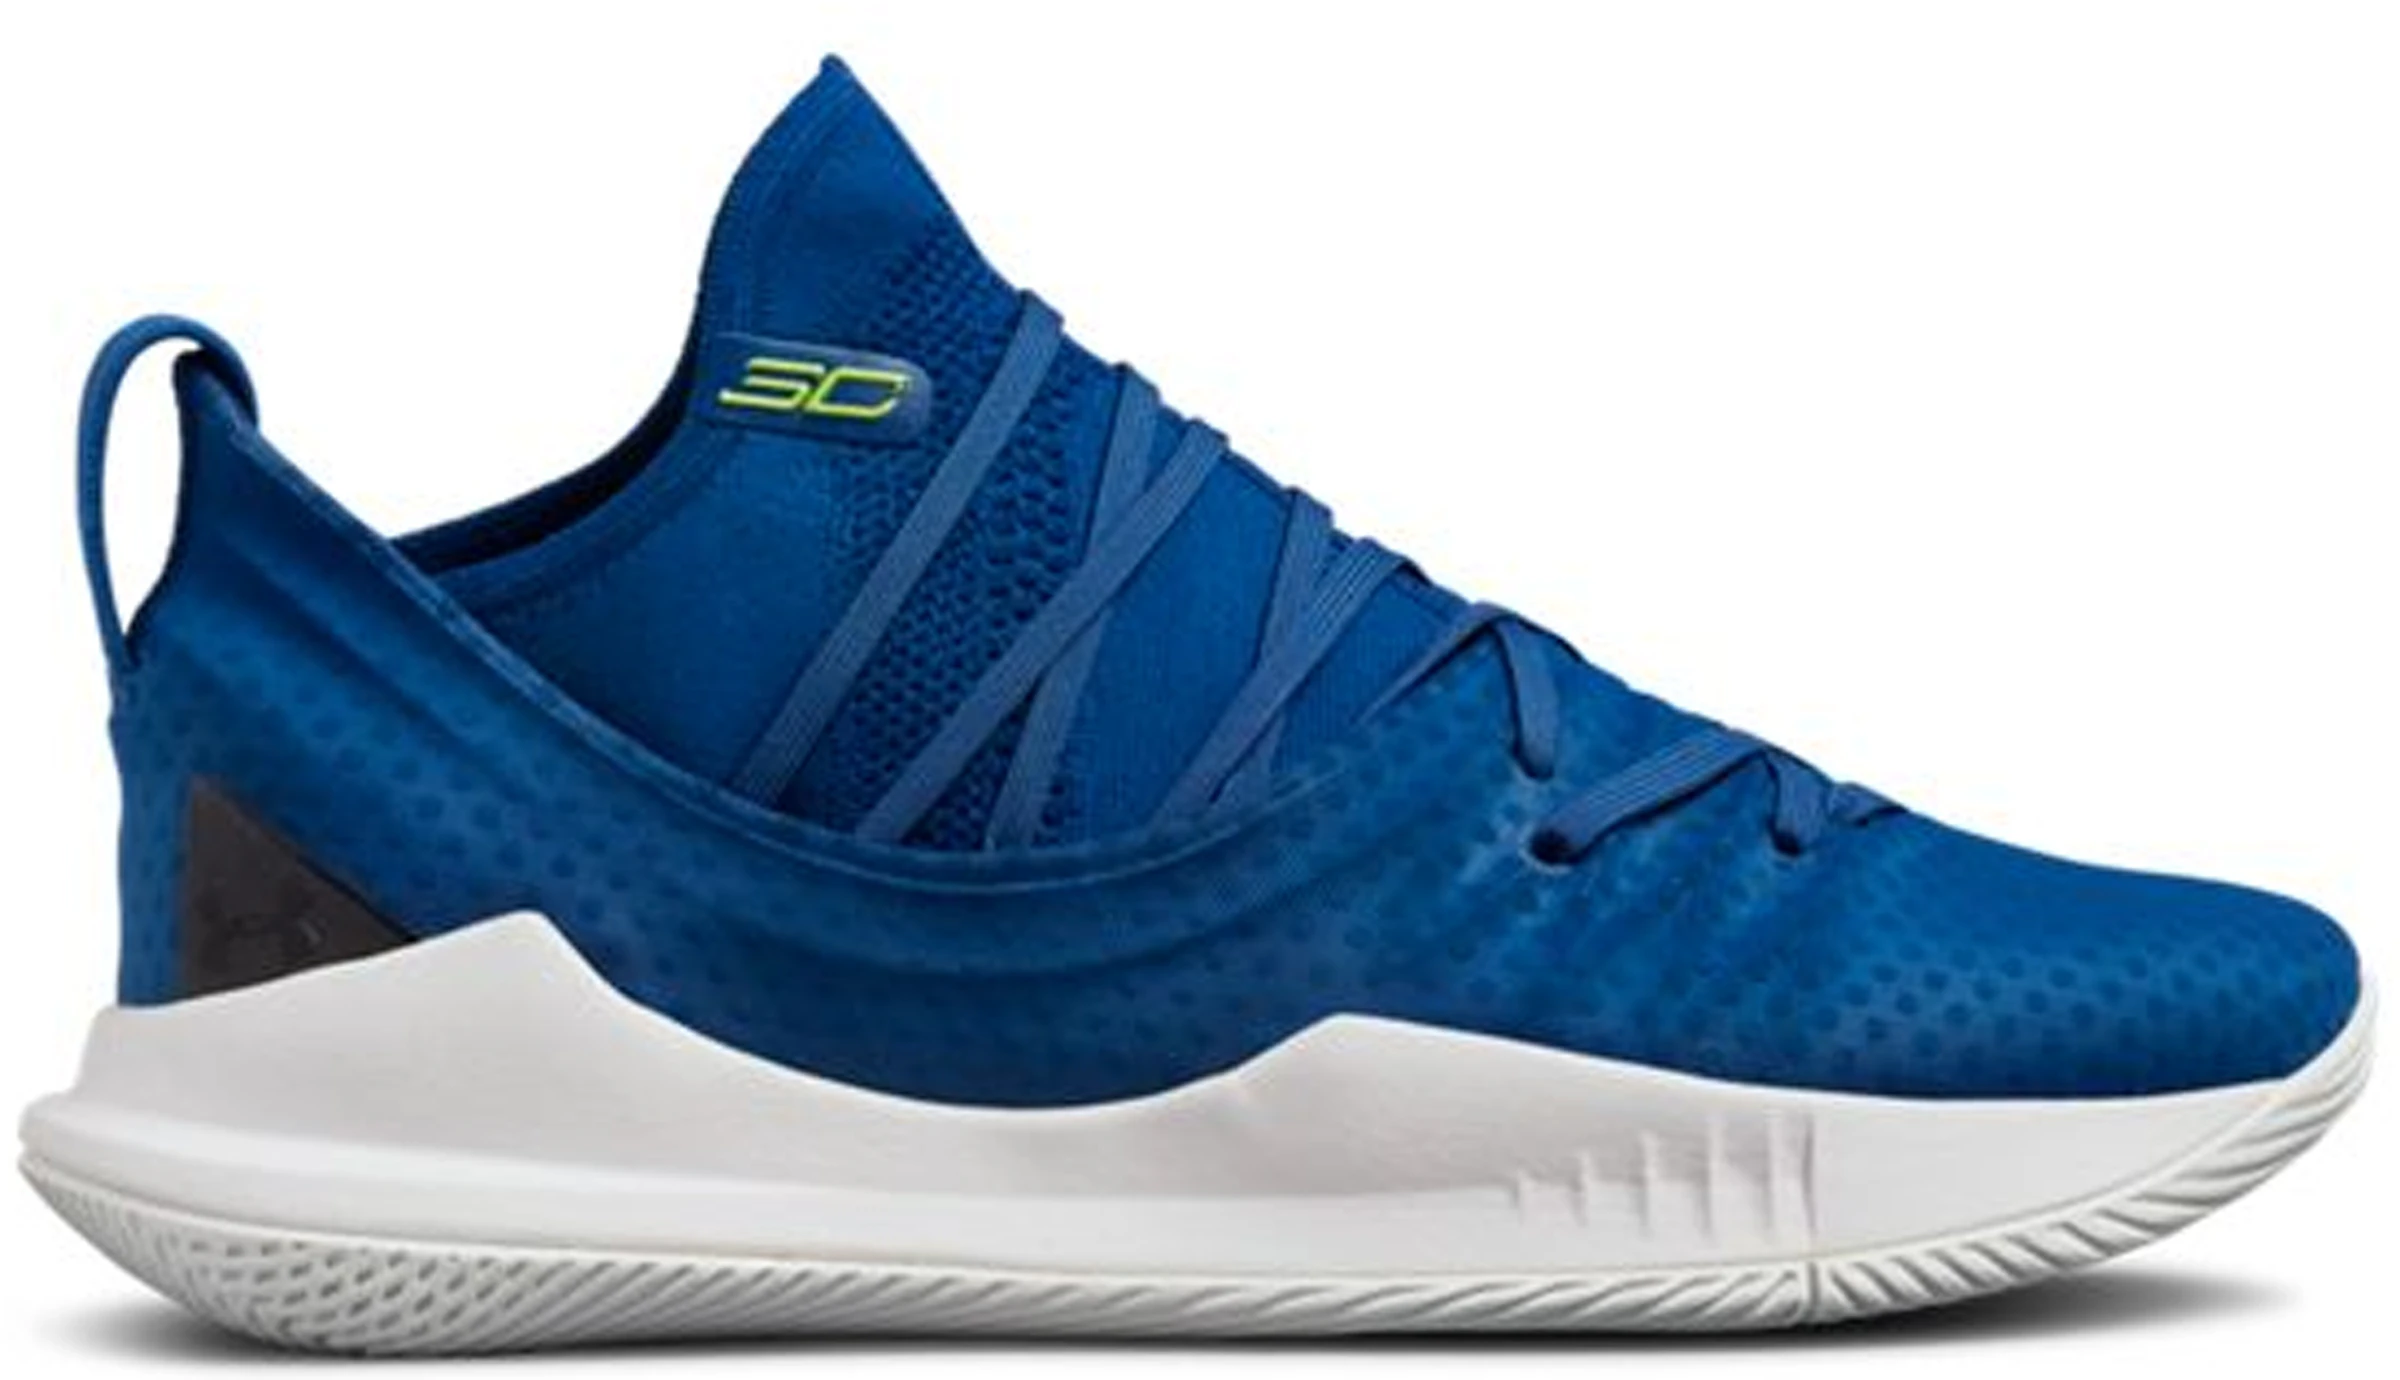 Under Armour Curry 5 Moroccan Blue - 3020657-401 - US